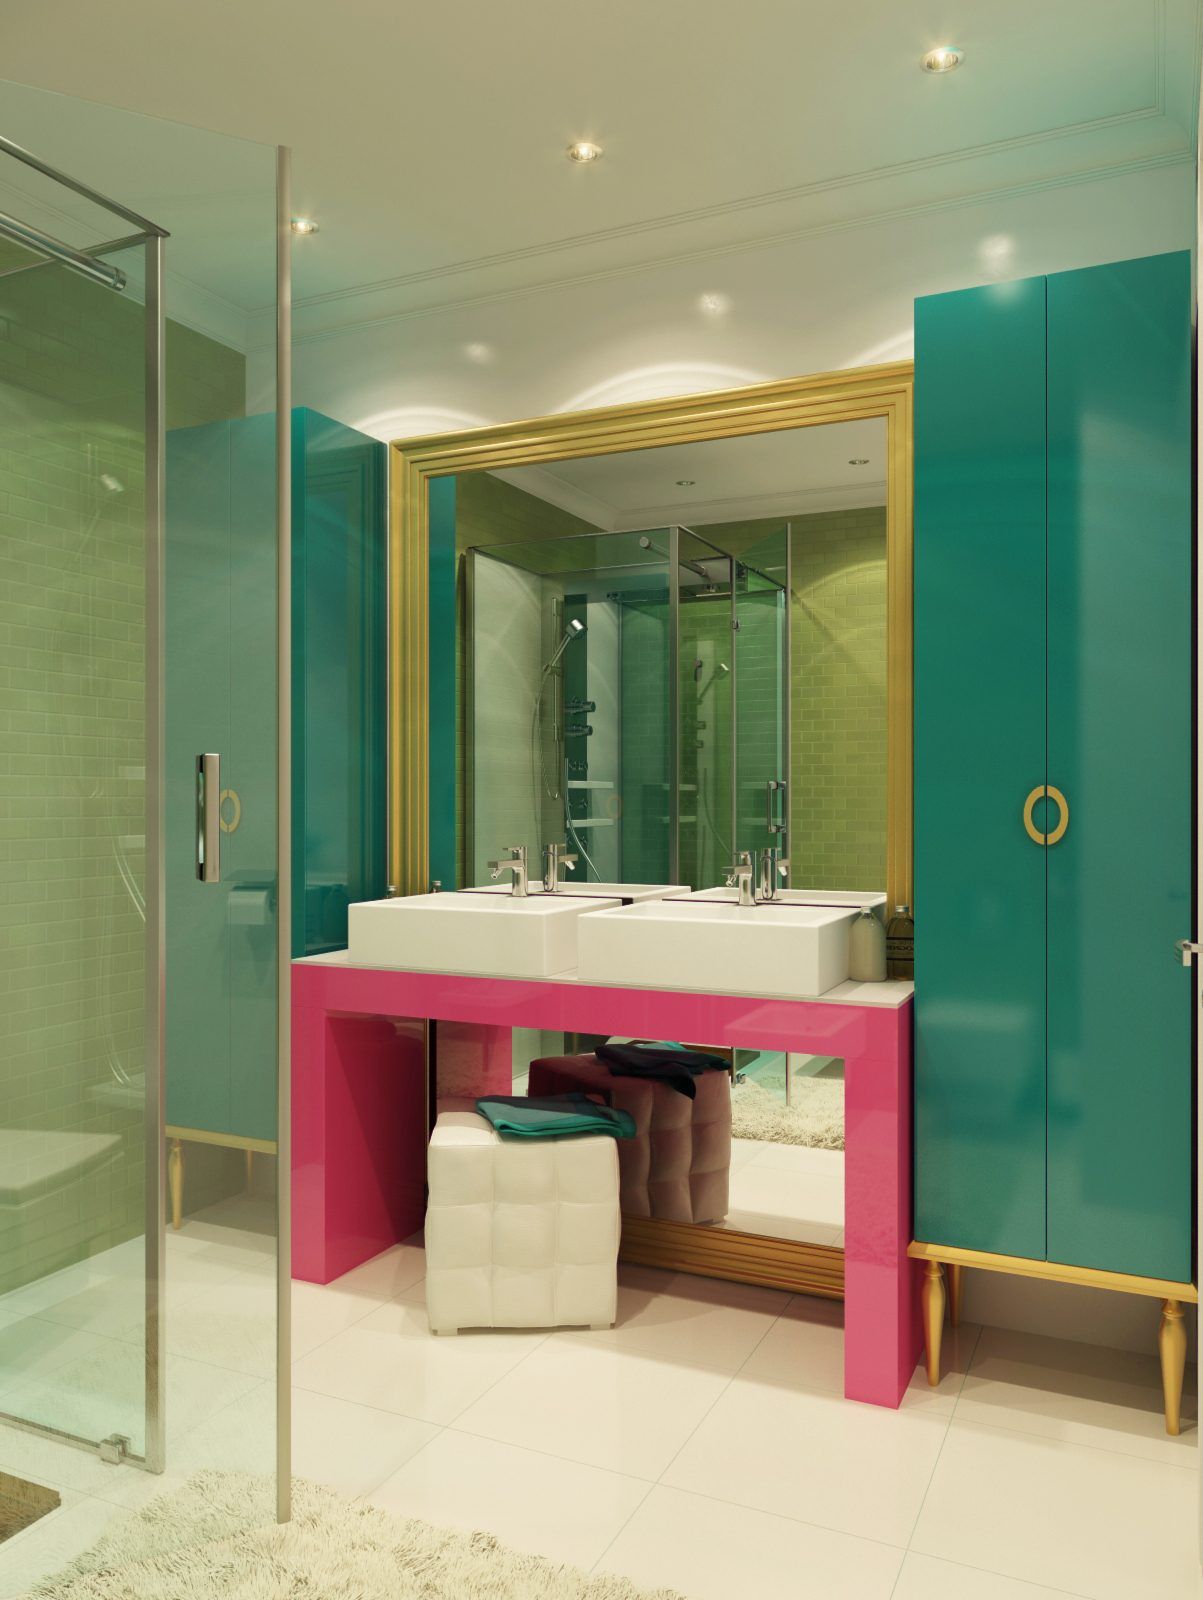 Turquoise bathroom paired with gold and pink elements